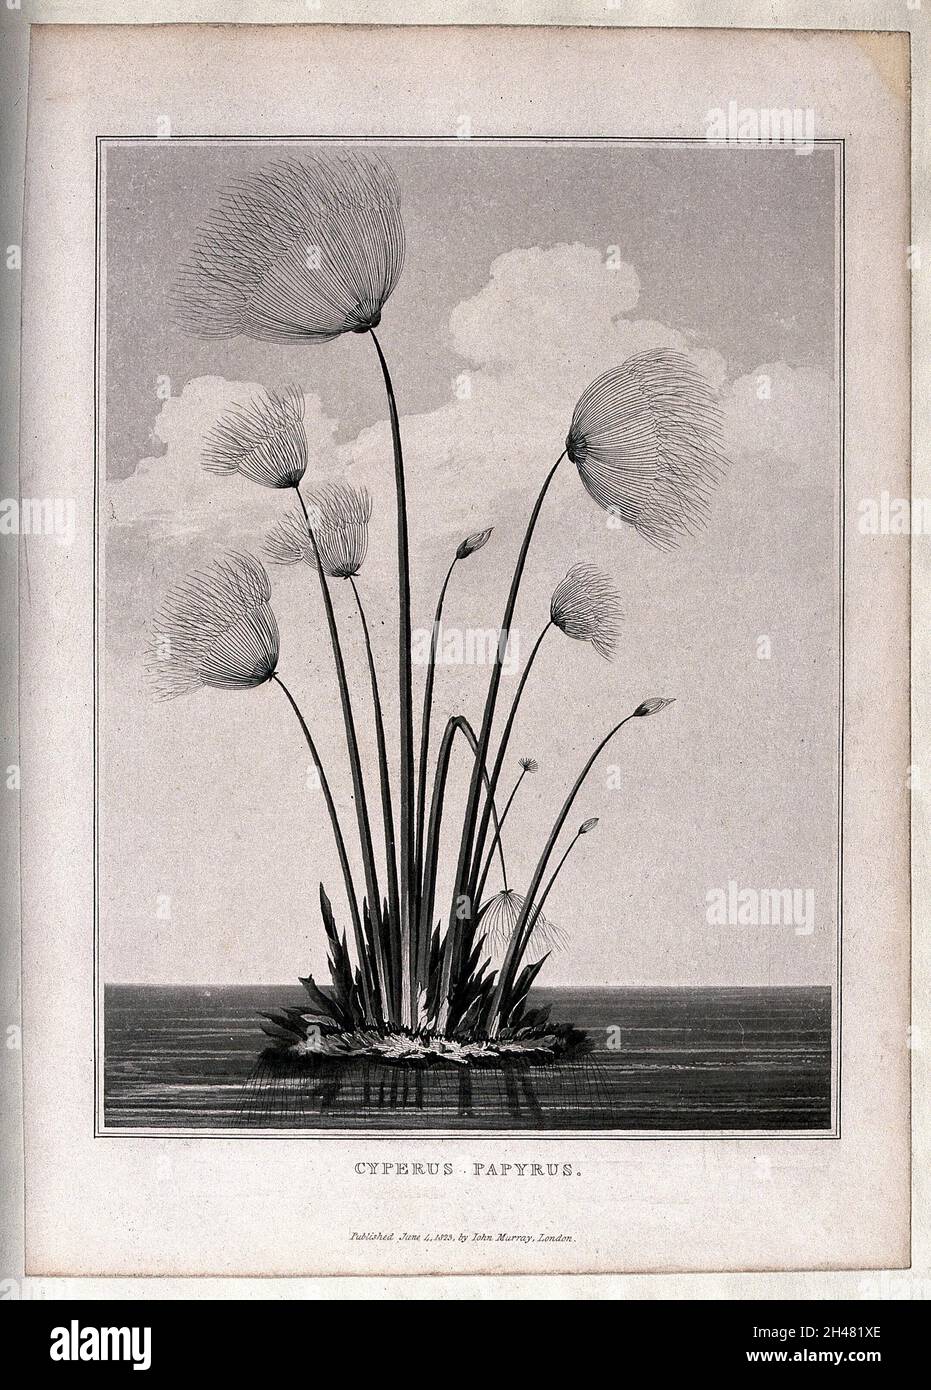 Papyrus reed (Cyperus papyrus L.): clump of reeds in water. Aquatint, 1823. Stock Photo